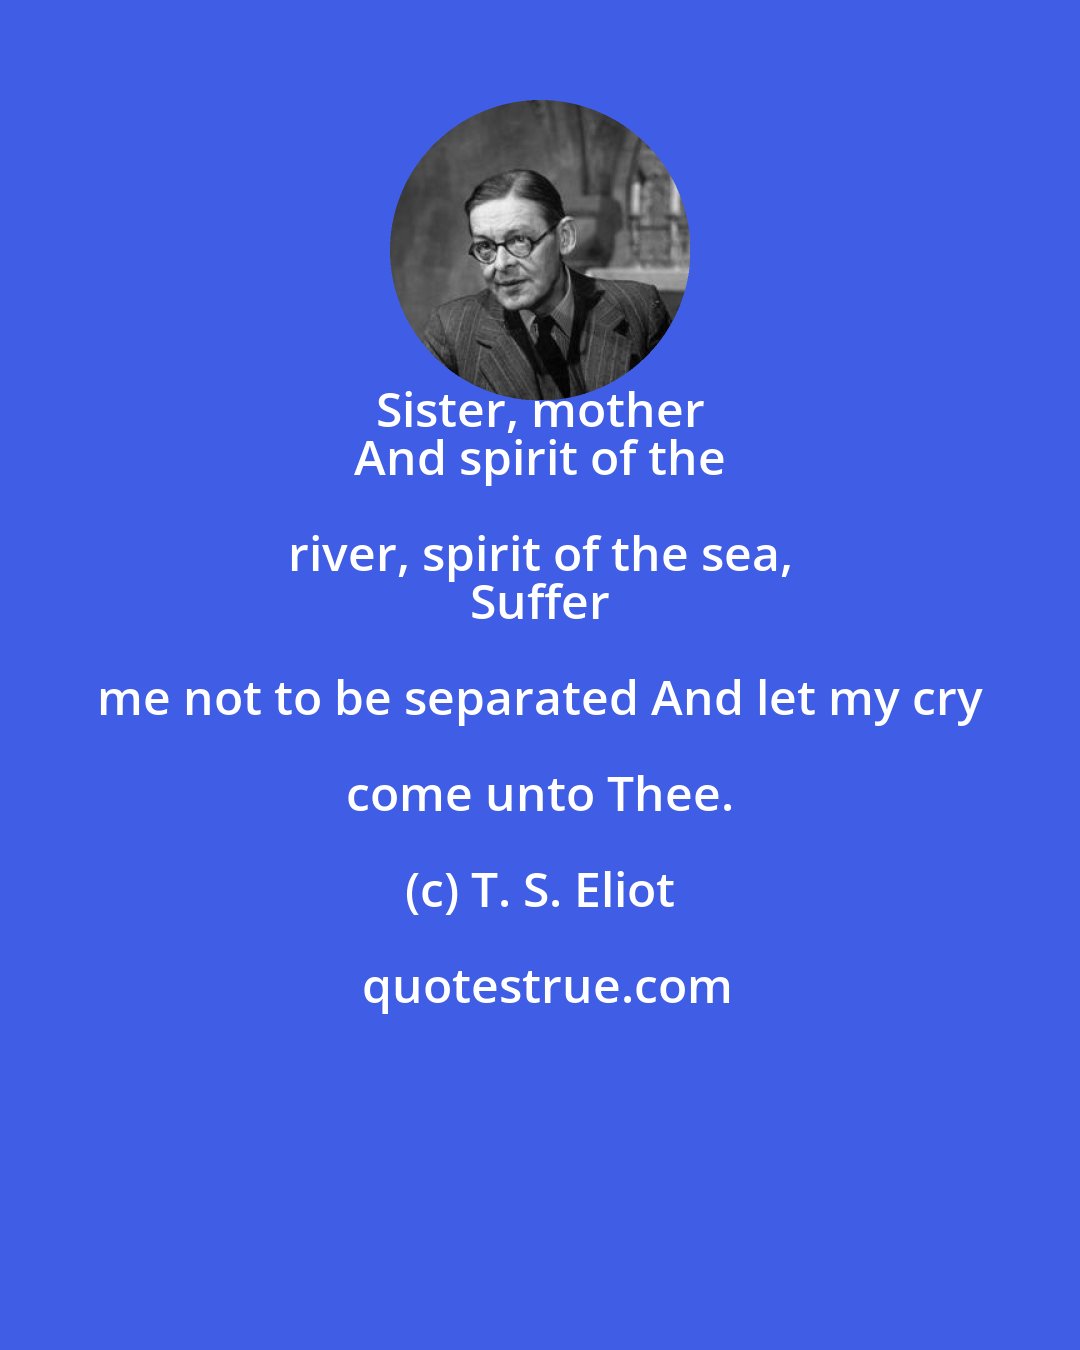 T. S. Eliot: Sister, mother 
 And spirit of the river, spirit of the sea, 
 Suffer me not to be separated And let my cry come unto Thee.